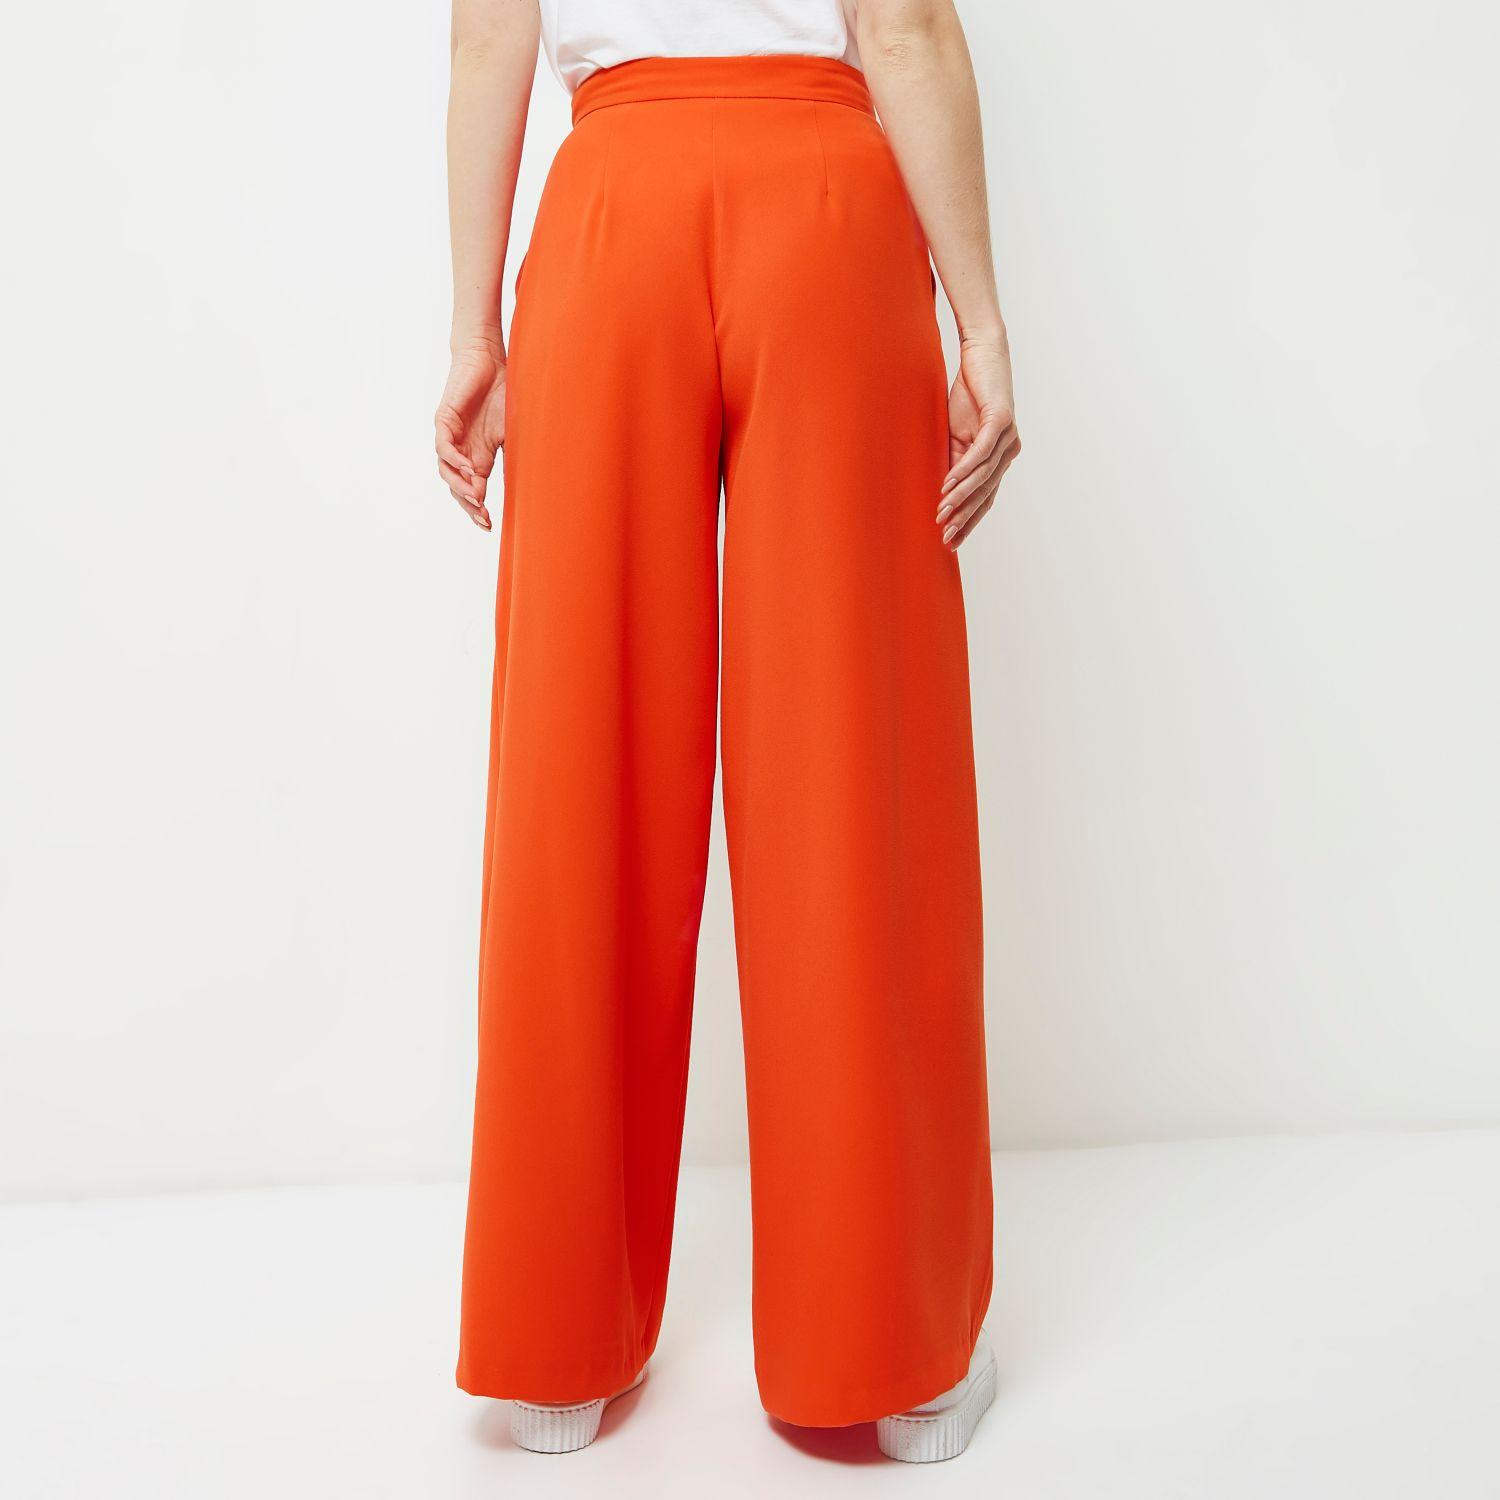 Olalook Women's Orange Belted Woven Viscon Palazzo Trousers PNT-19000169 -  Trendyol